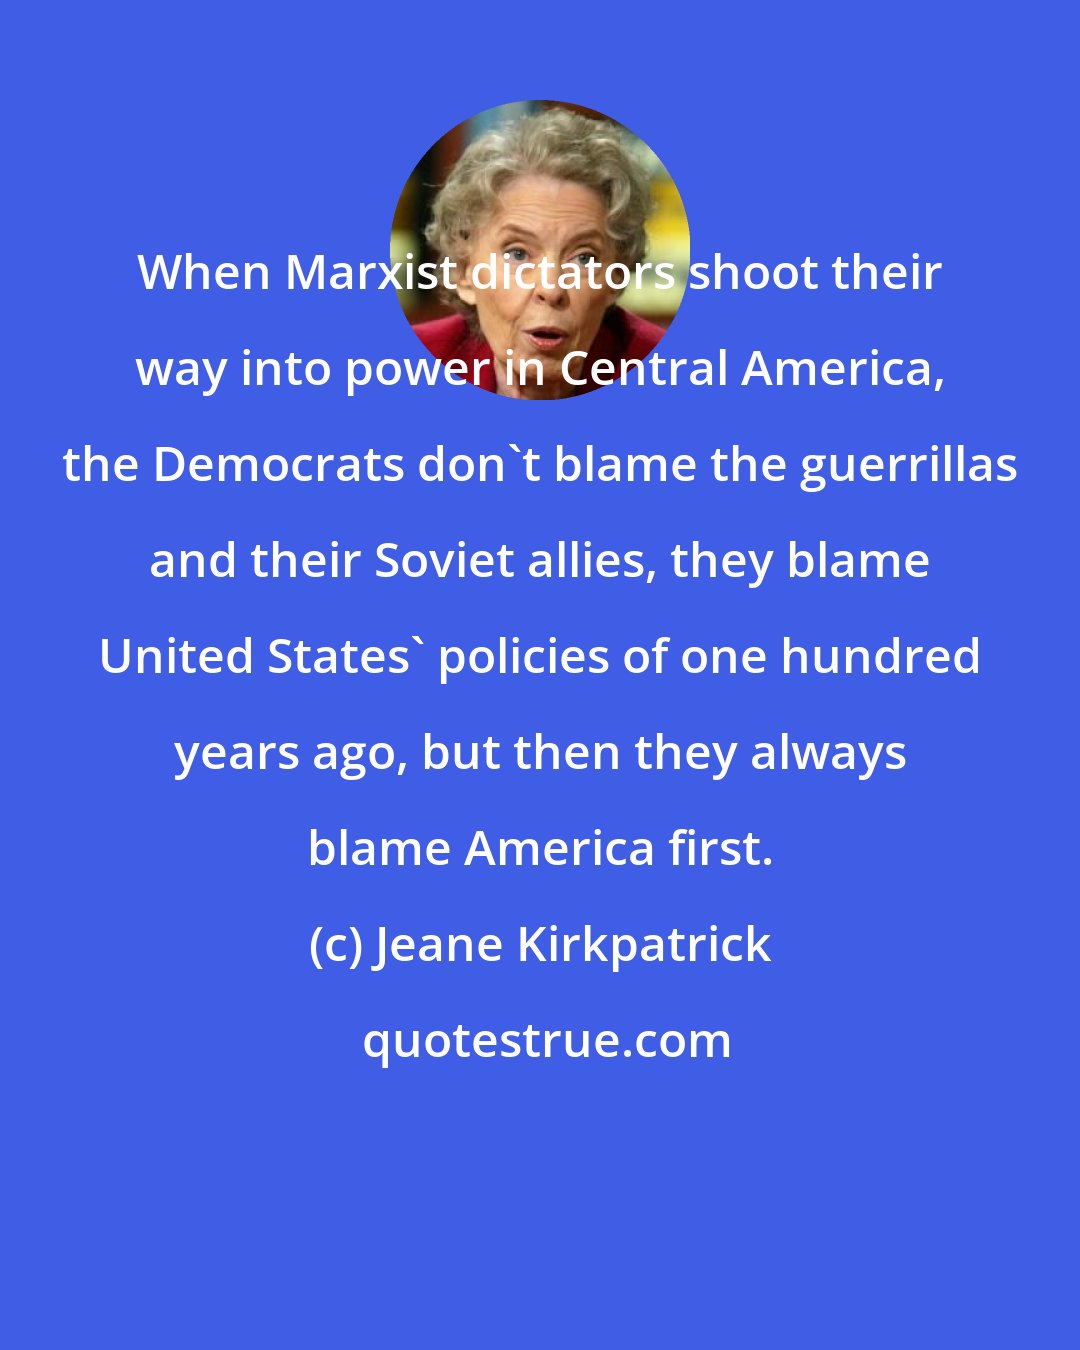 Jeane Kirkpatrick: When Marxist dictators shoot their way into power in Central America, the Democrats don't blame the guerrillas and their Soviet allies, they blame United States' policies of one hundred years ago, but then they always blame America first.